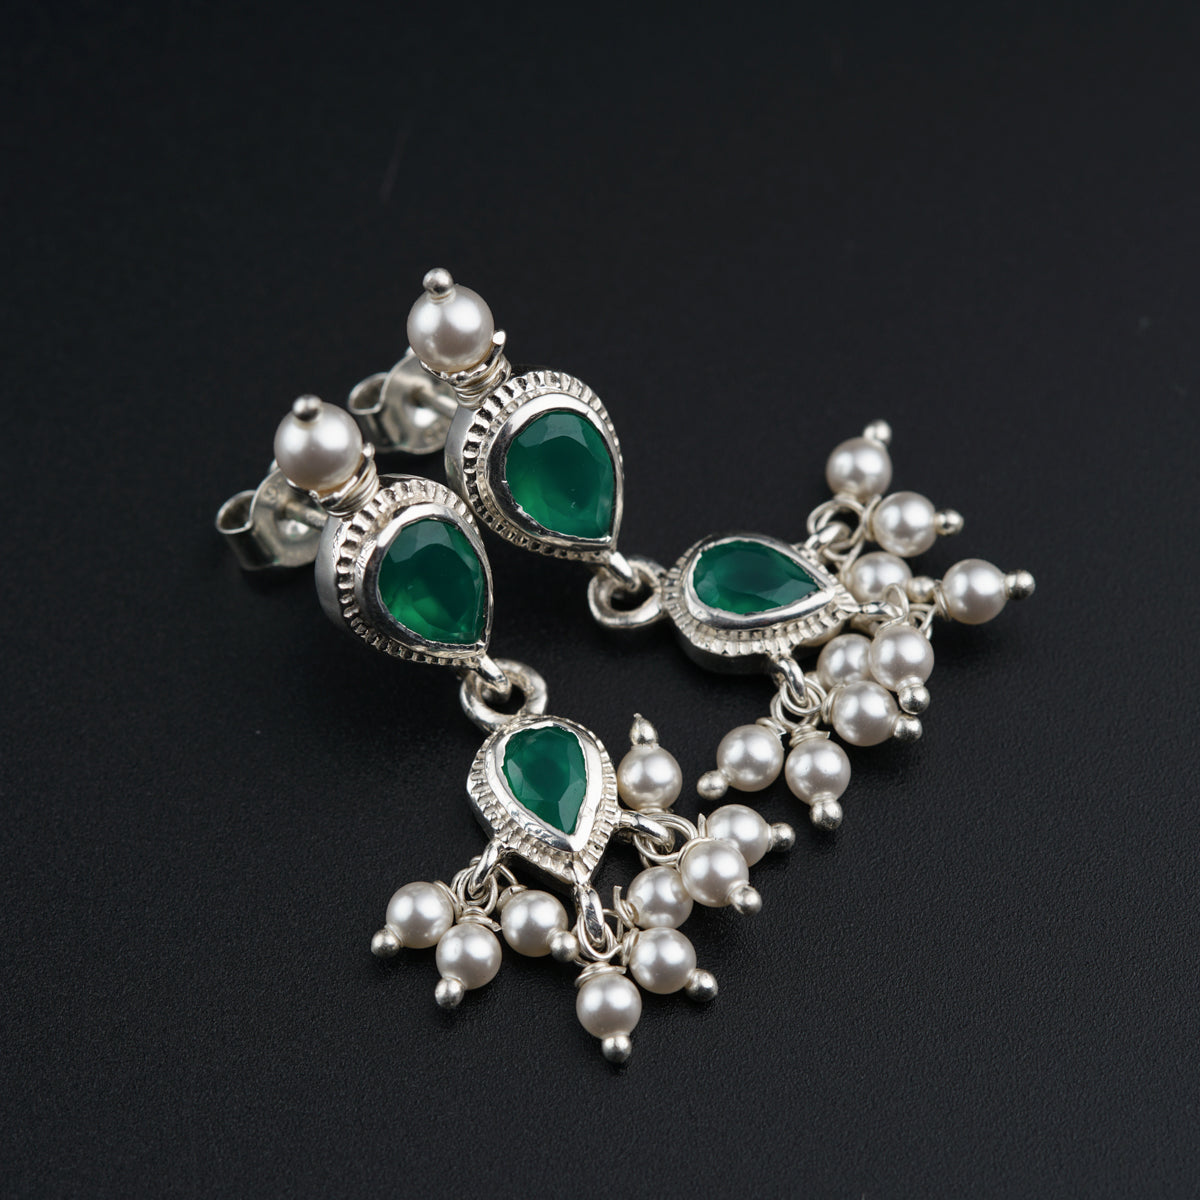 a pair of green and white earrings on a black surface